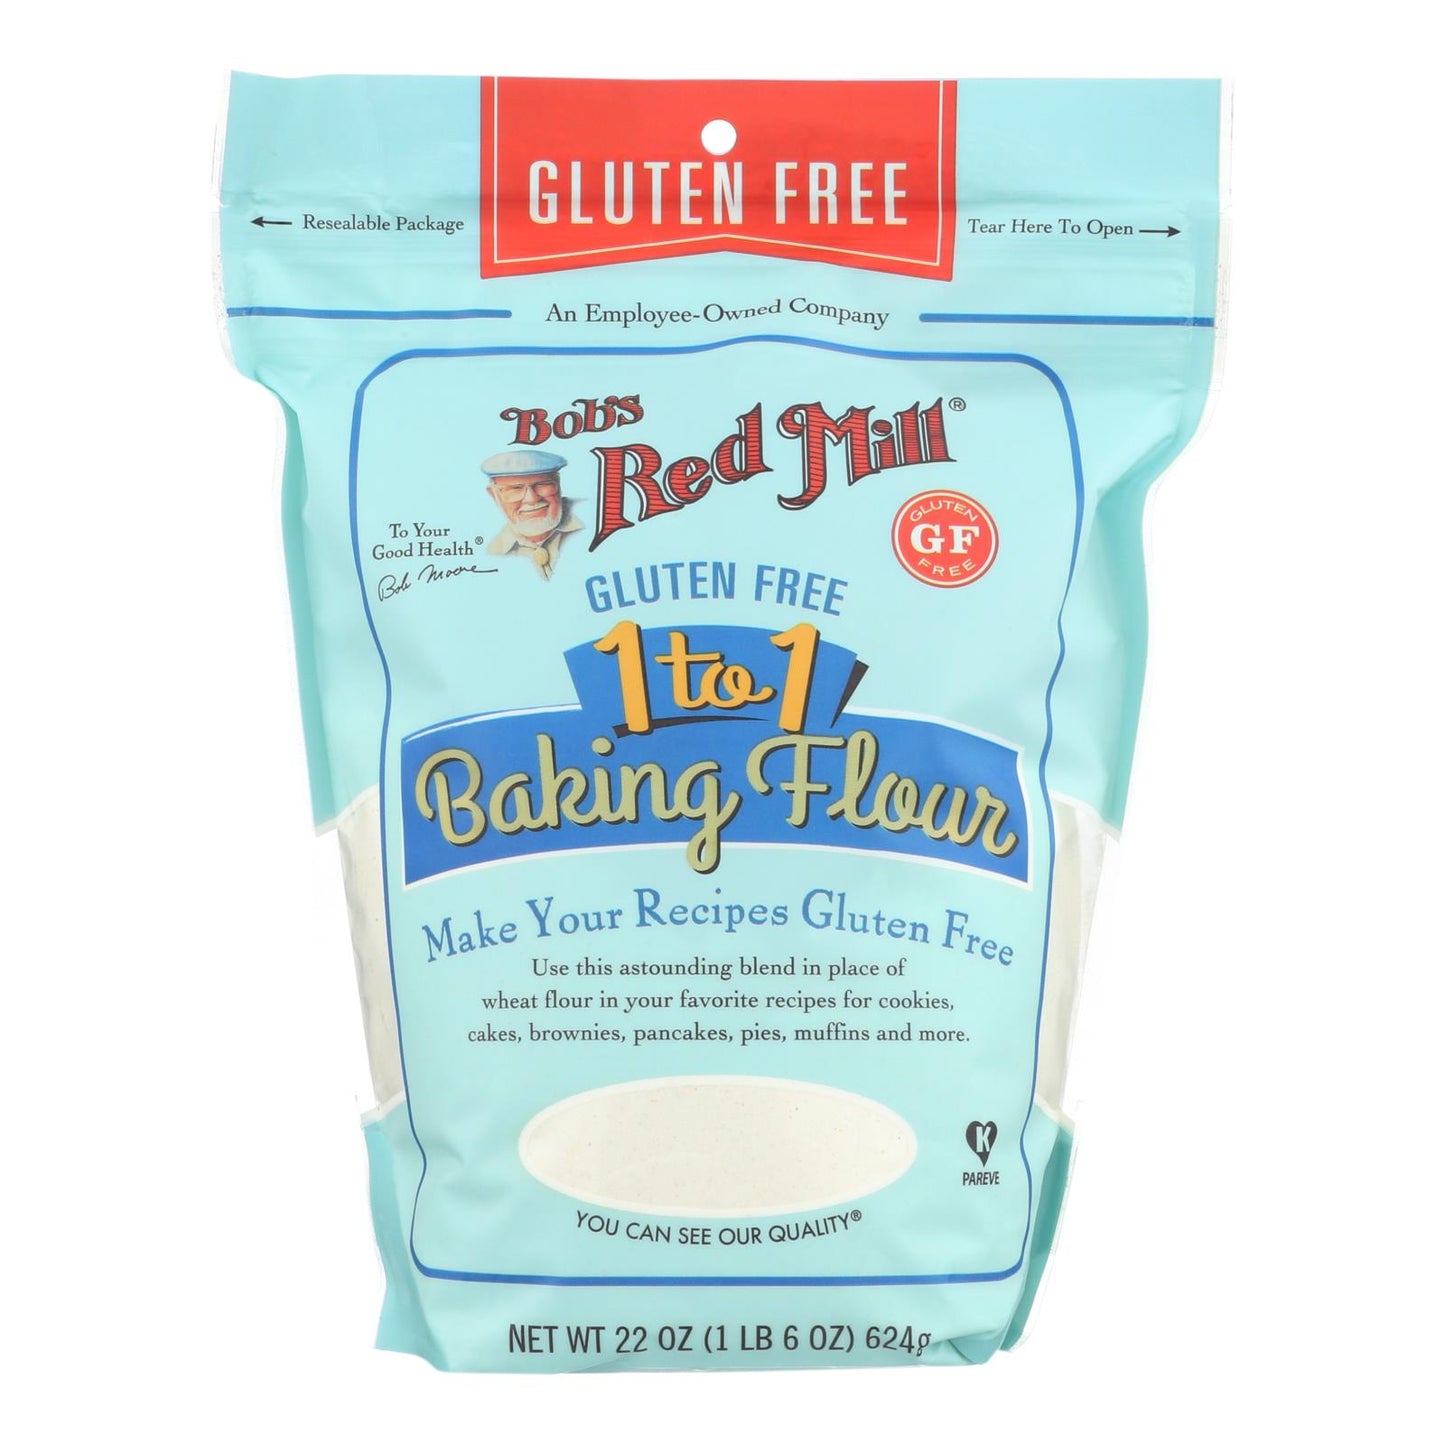 Bob's Red Mill - Baking Flour 1 To 1 - Case Of 4-22 Oz